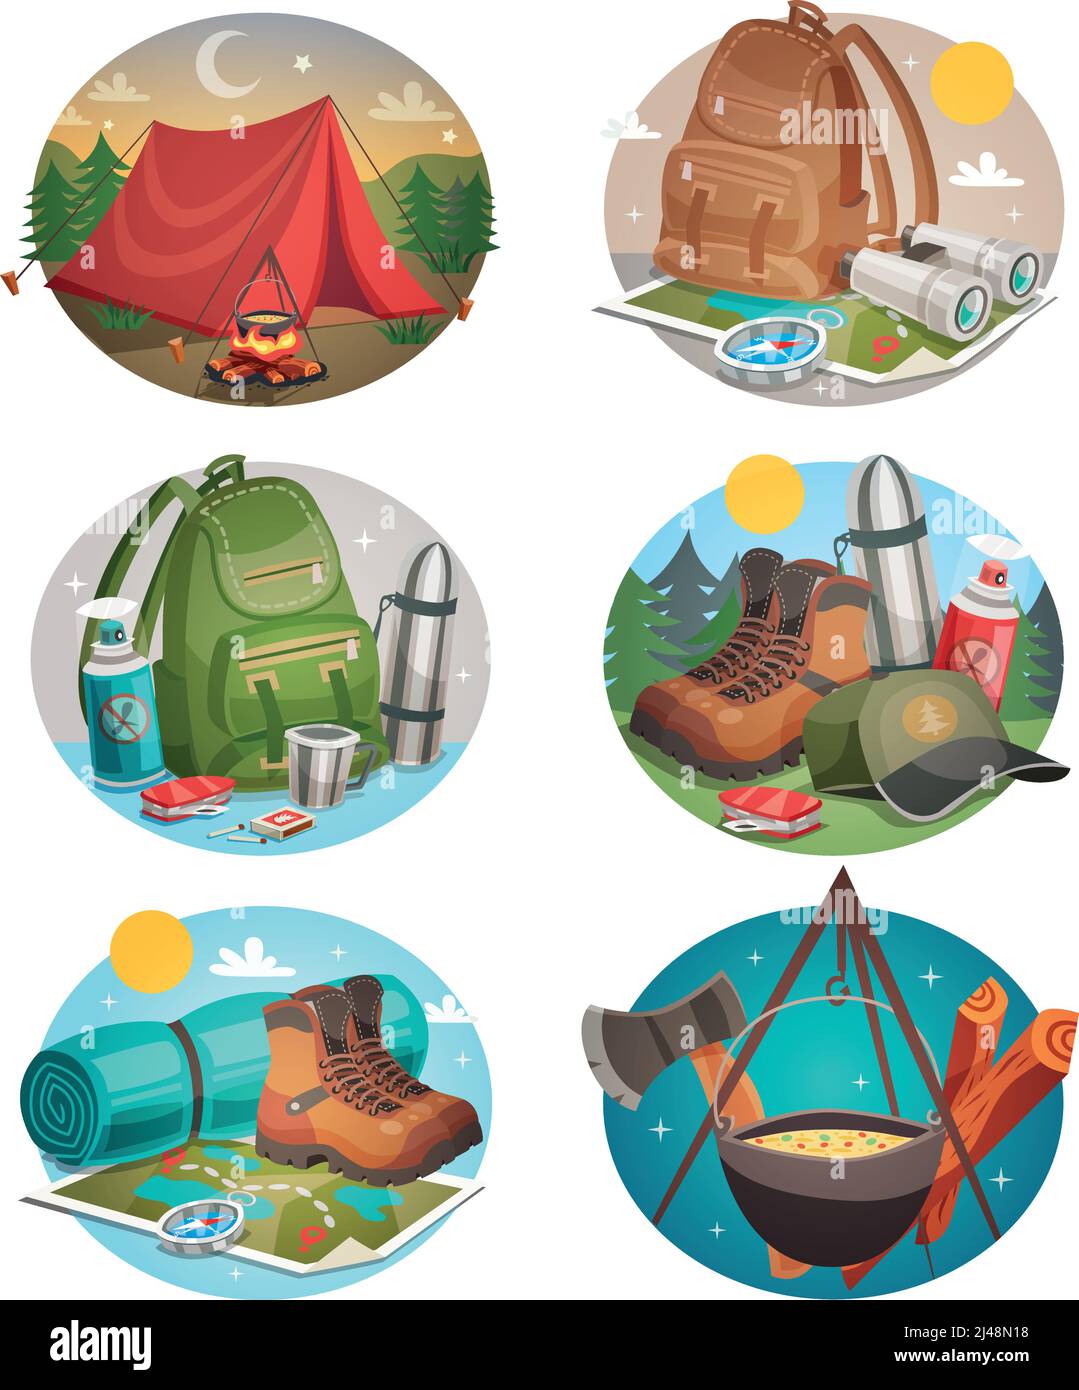 https://c8.alamy.com/comp/2J48N18/camping-set-of-round-compositions-with-tent-bonfire-backpack-and-boots-compass-and-map-isolated-vector-illustration-2J48N18.jpg